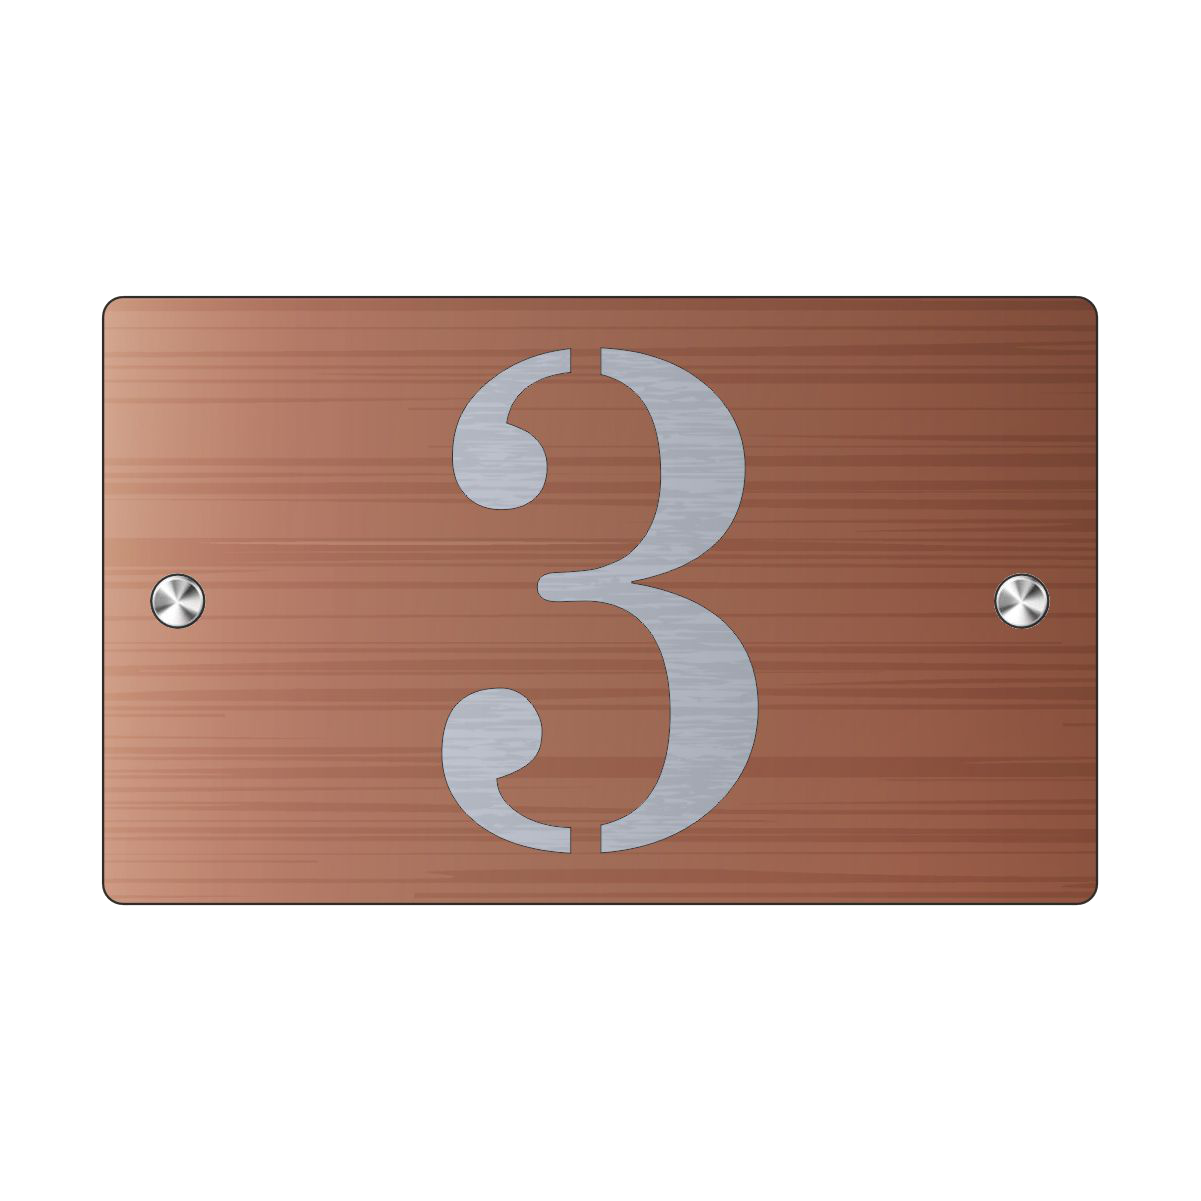 Premium Personalized Street Sign and House Number S1 Mini Brushed Copper Steel Base 